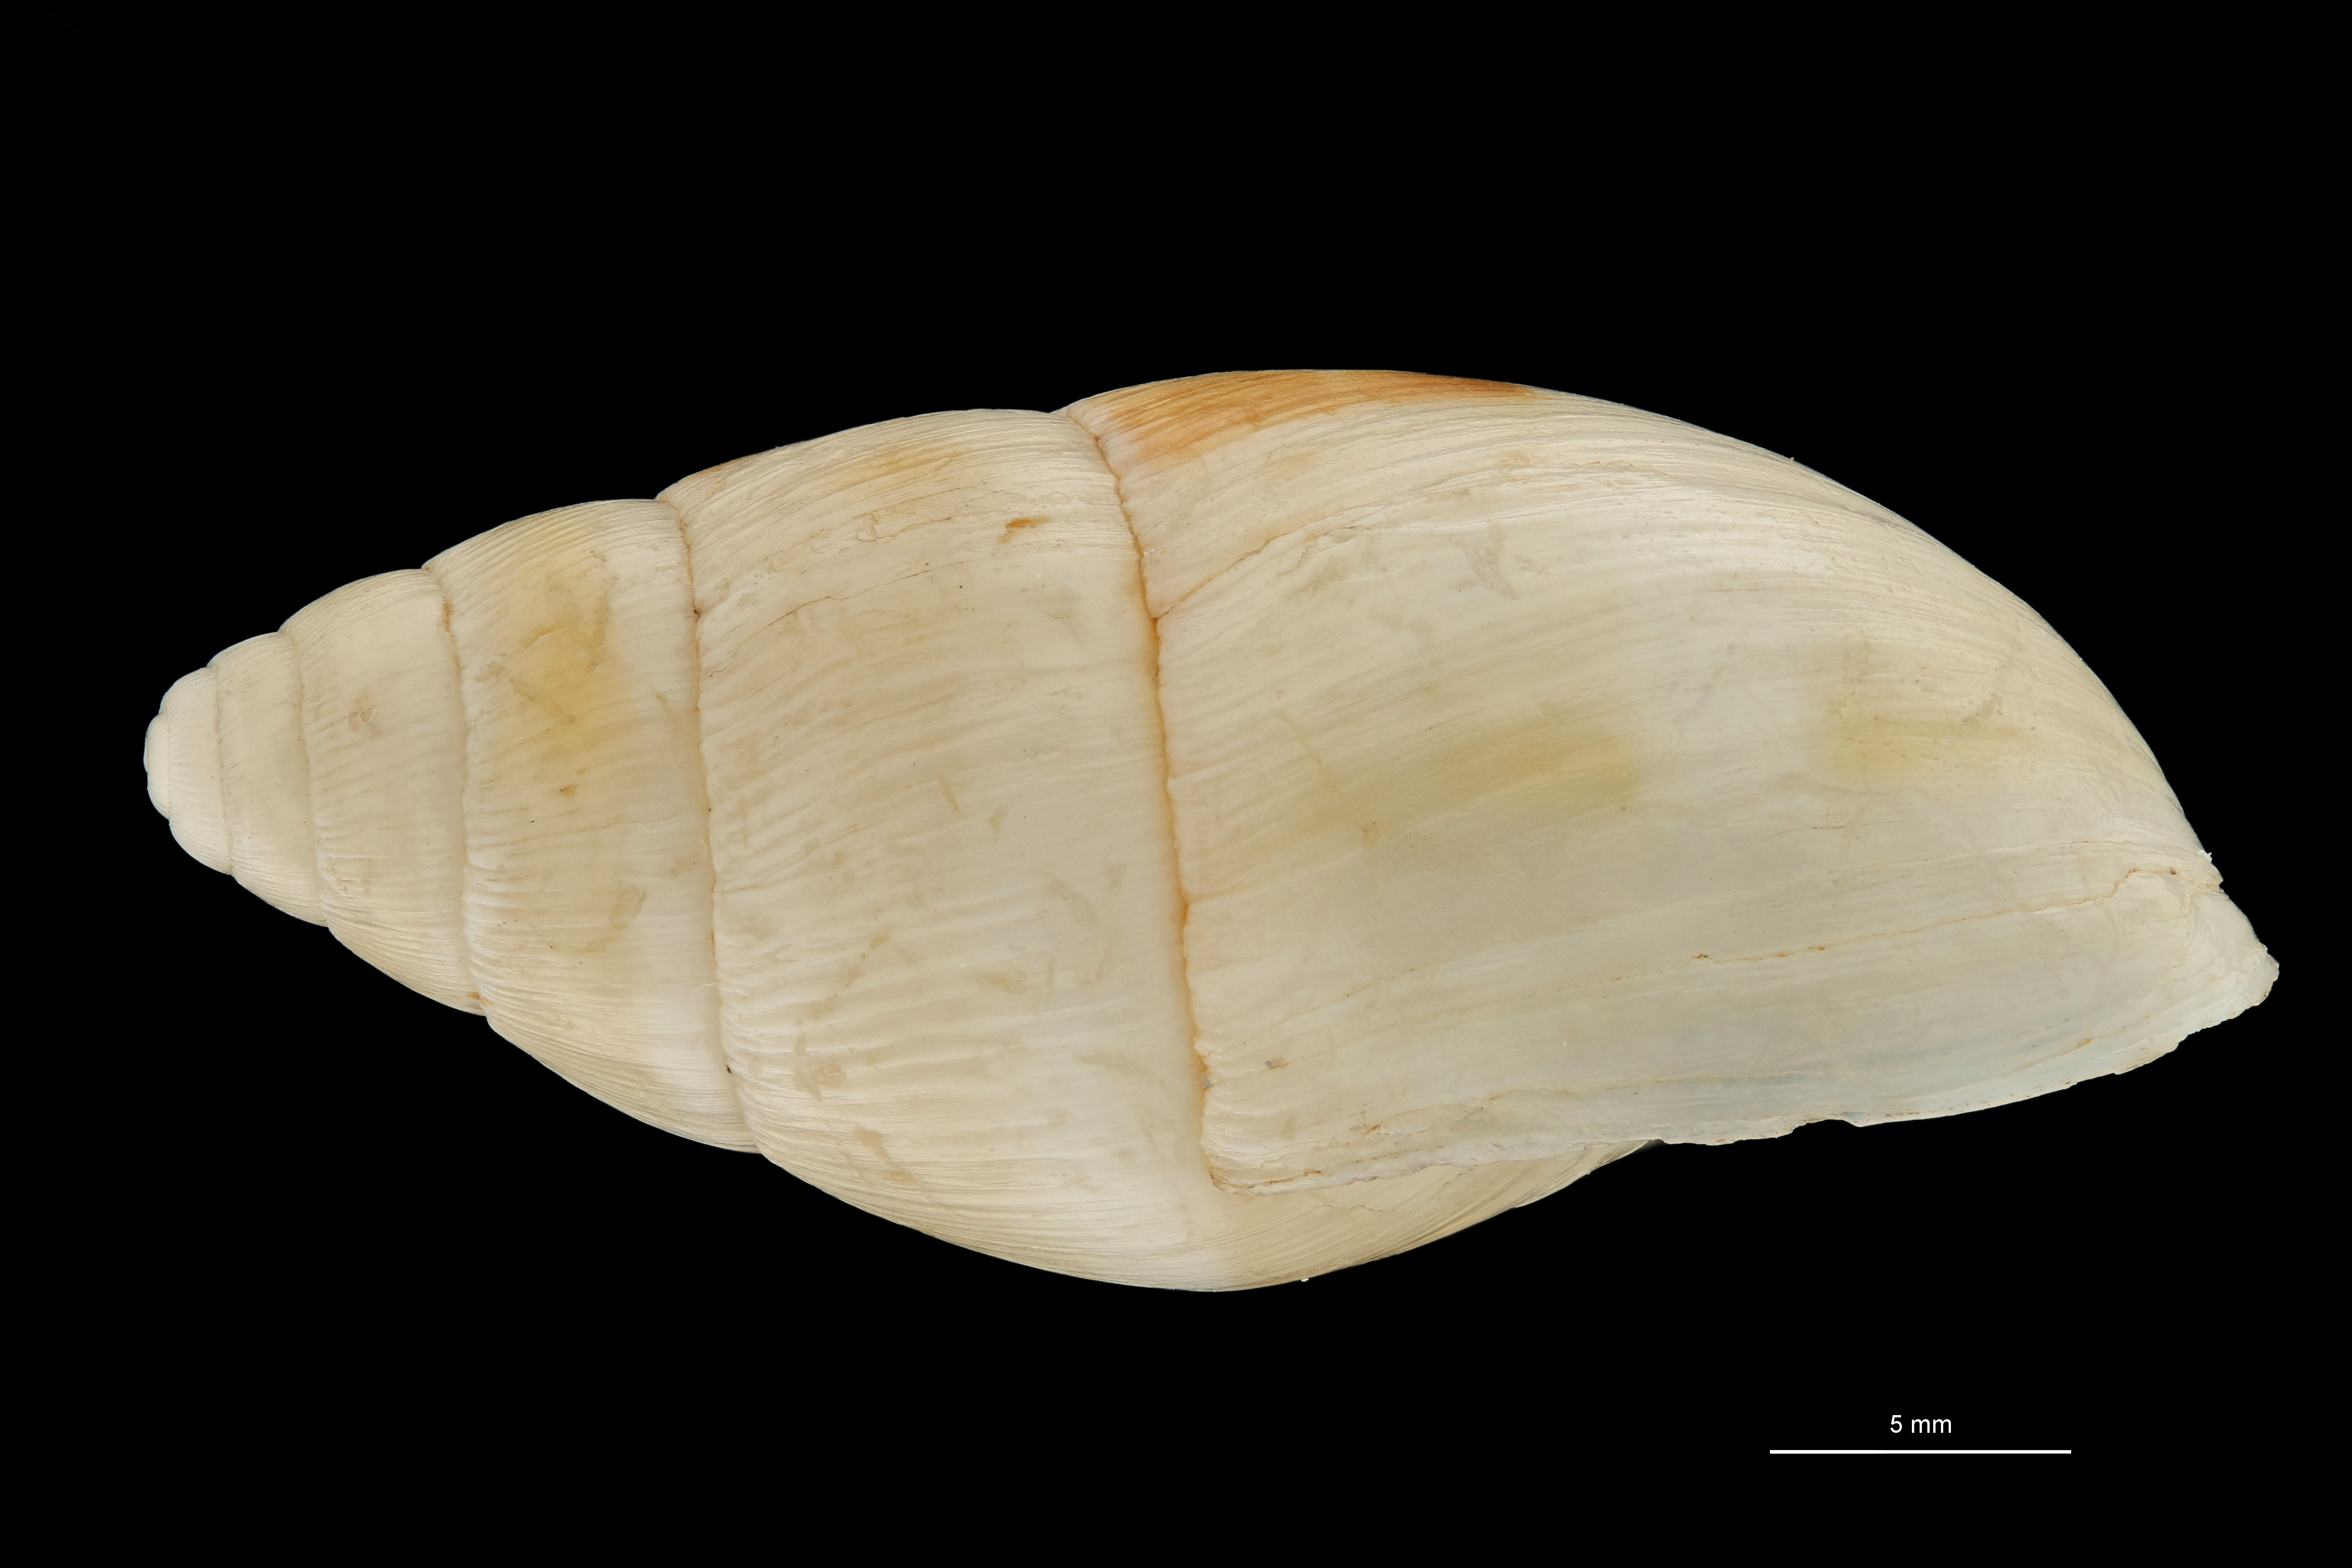 BE-RBINS-INV HOLOTYPE MT 657 Leucotaenius laevis LATERAL ZS PMax Scaled.jpg